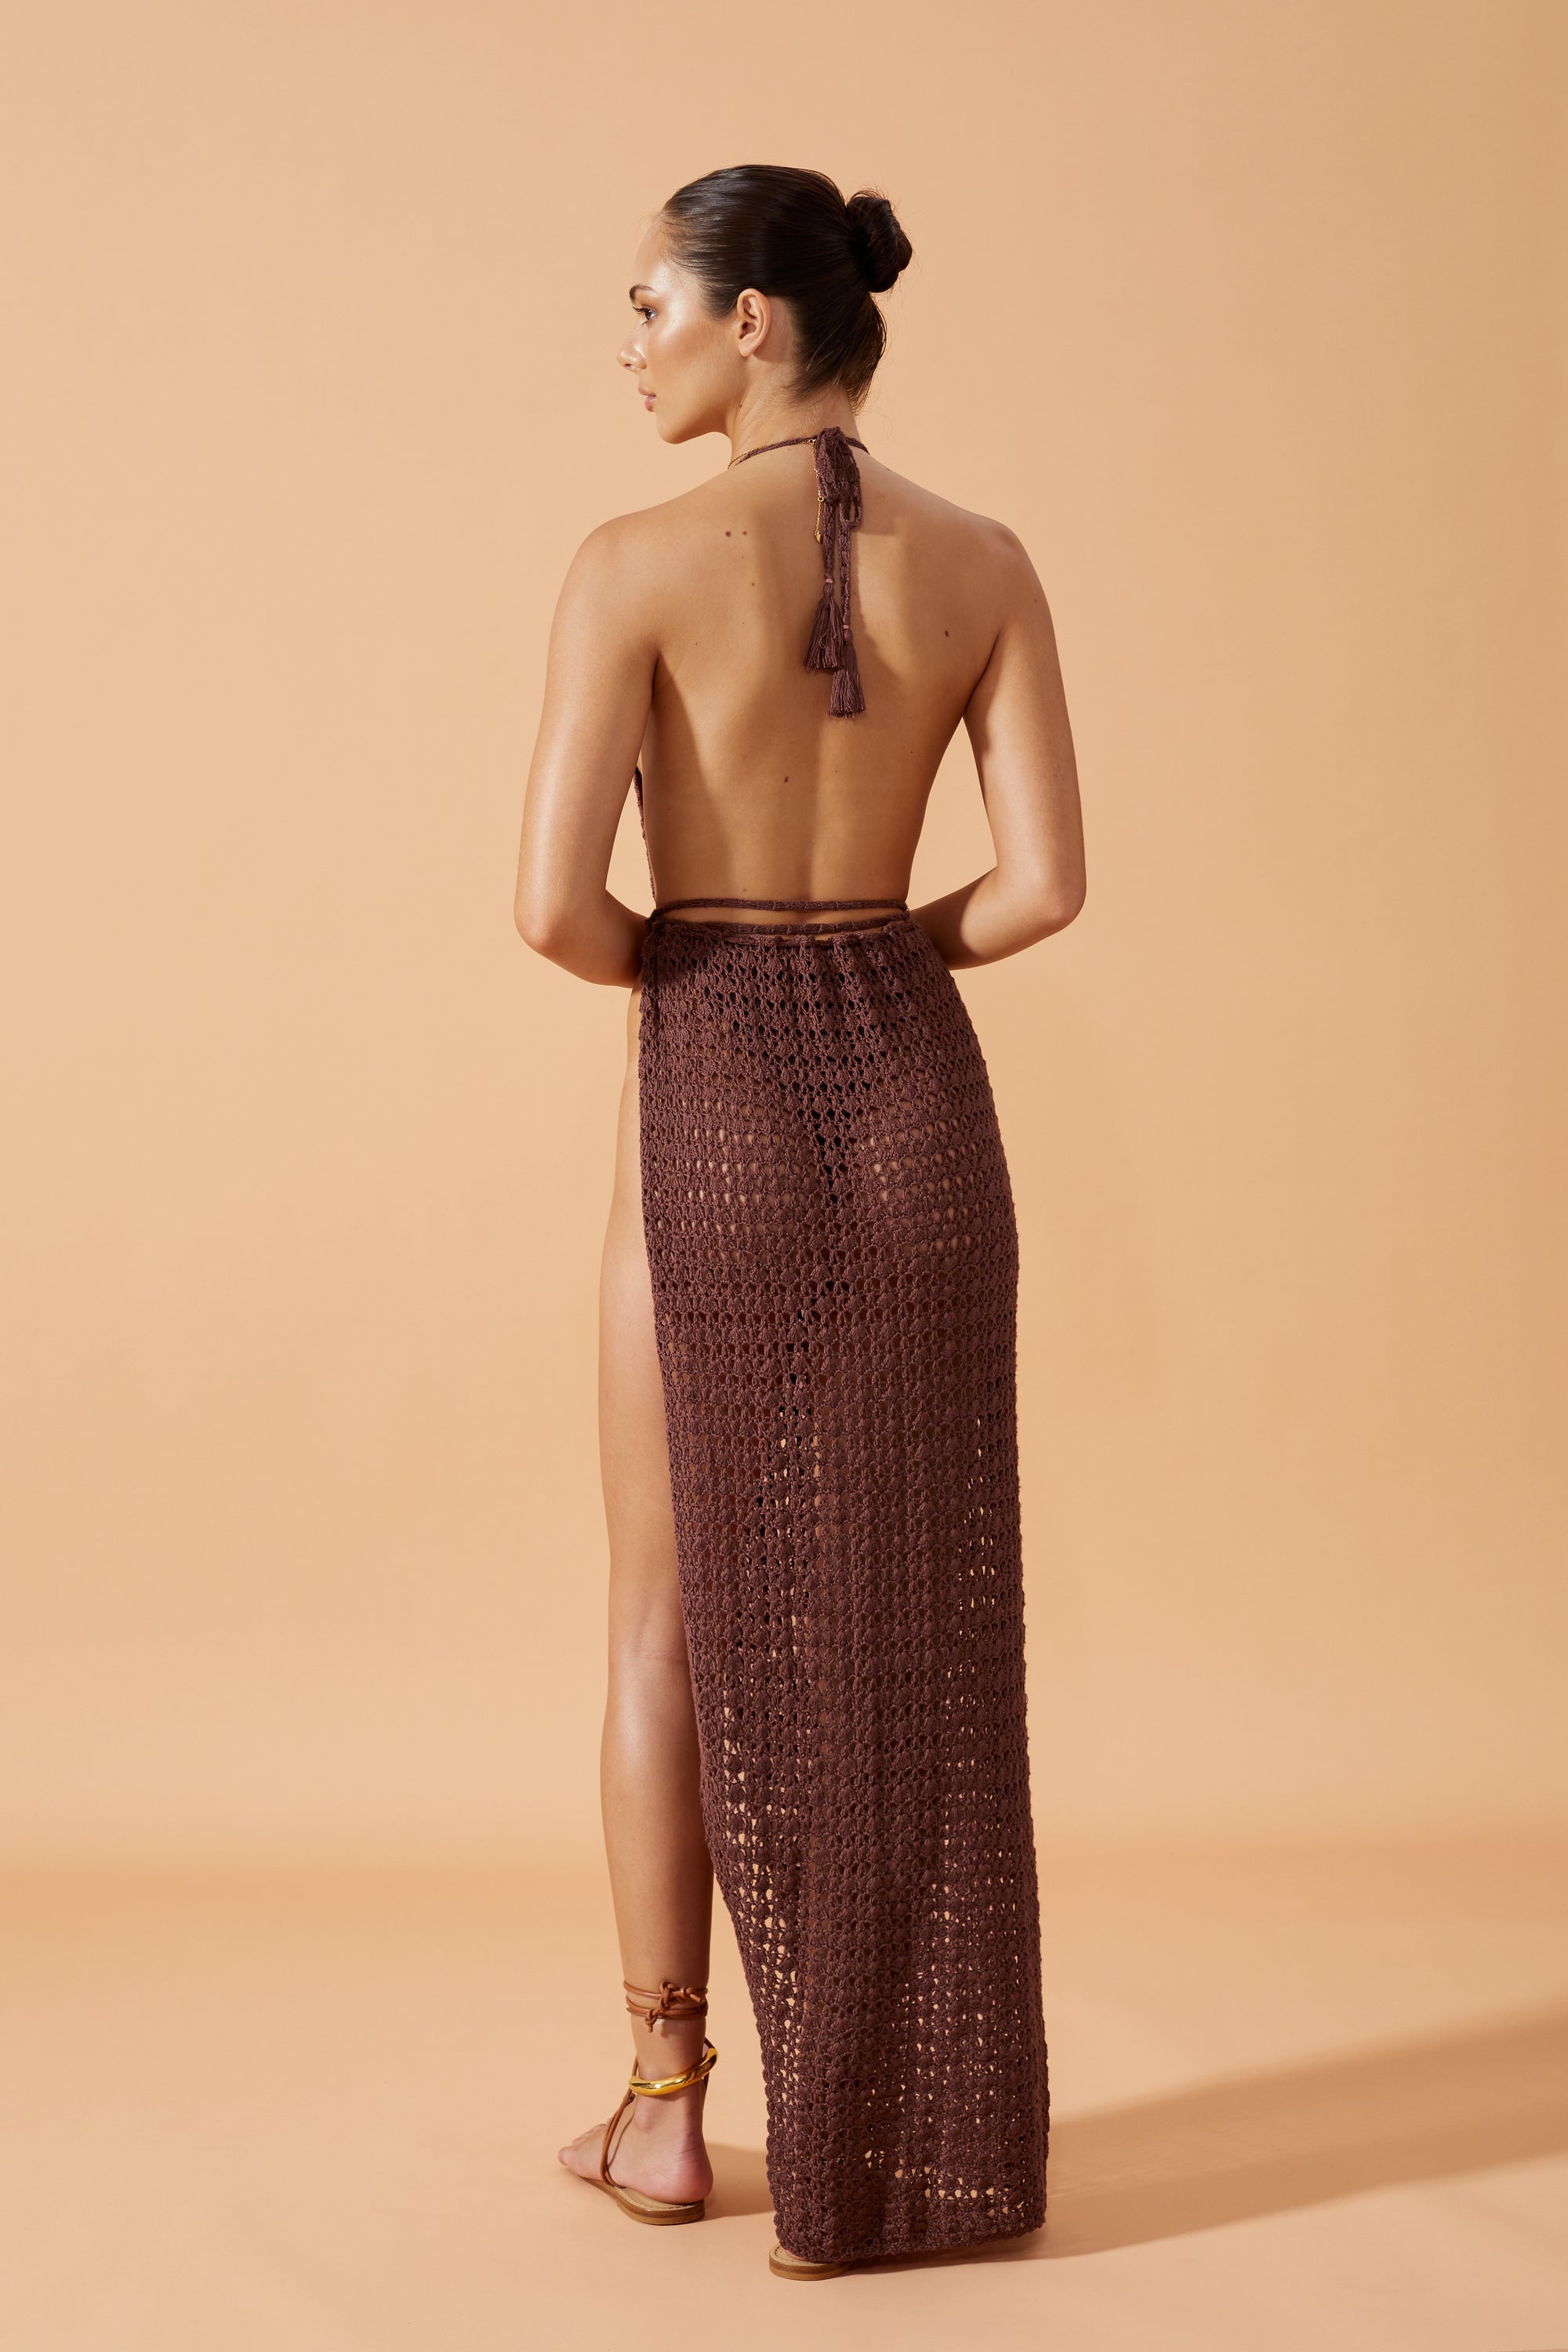 Flook The Label  Zahira  Crochet  Wrao Kong Dress in coconut Husk. Worn with Senso Drop Necklace in tortoise. Back View